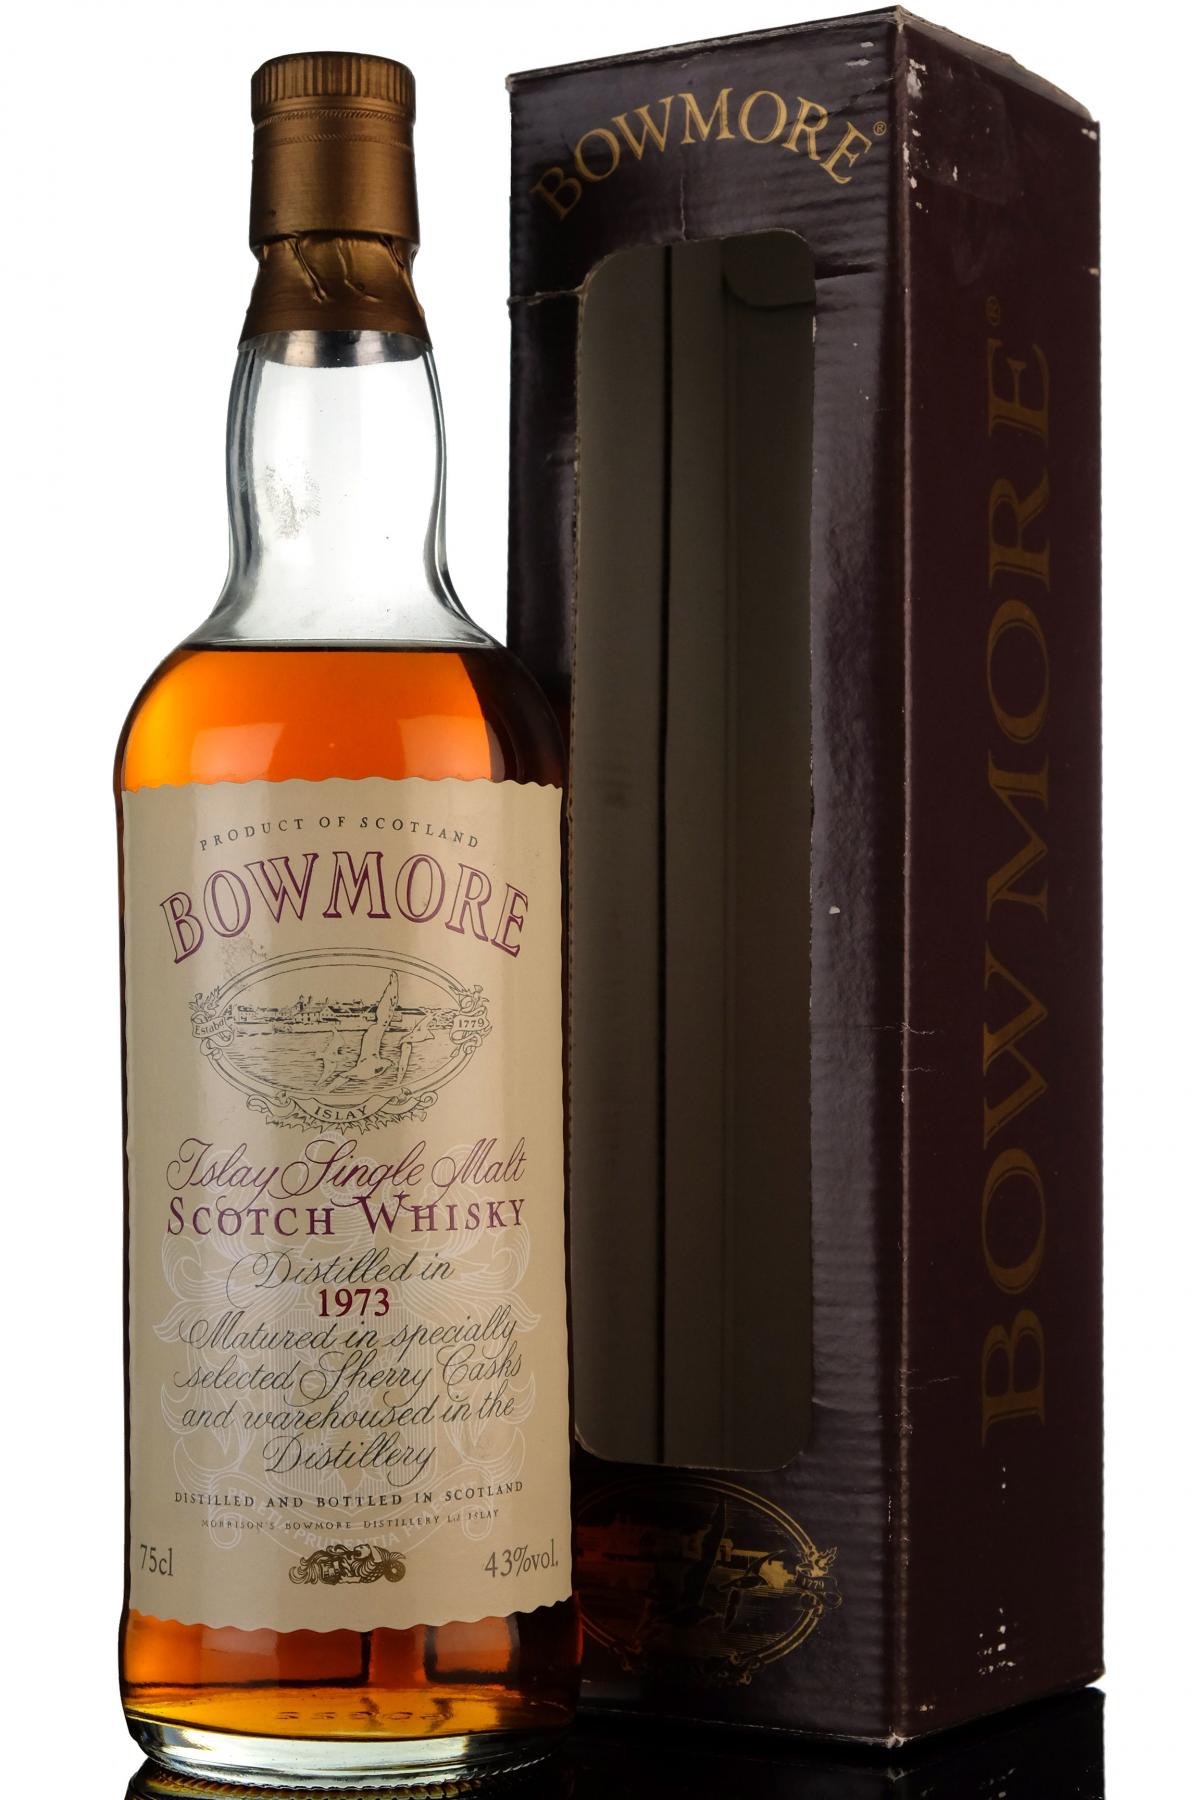 Bowmore 1973 - Sherry Cask - Vintage Label - Butts 5175 & 5176